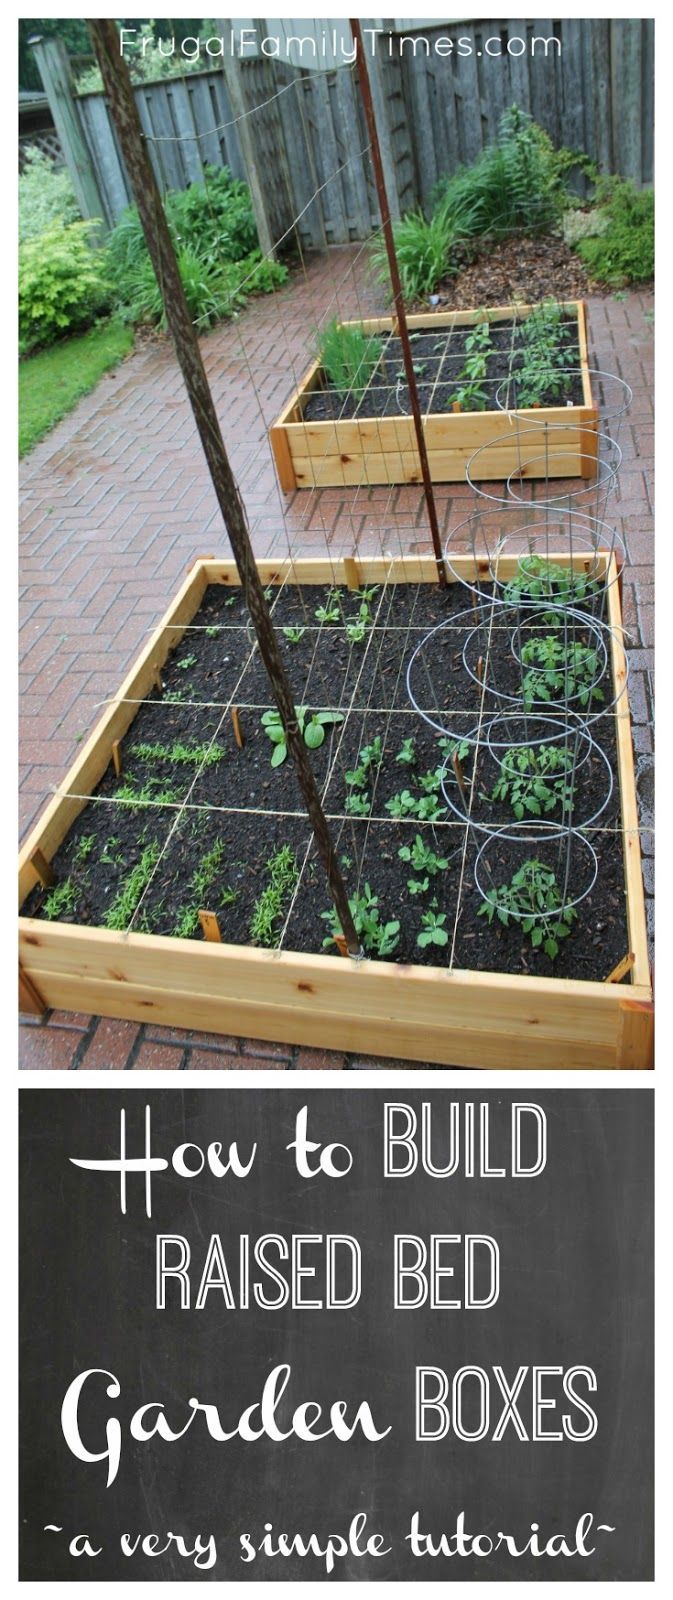 How to Build Raised Garden Boxes DIY (Grow vegetables anywhere!)